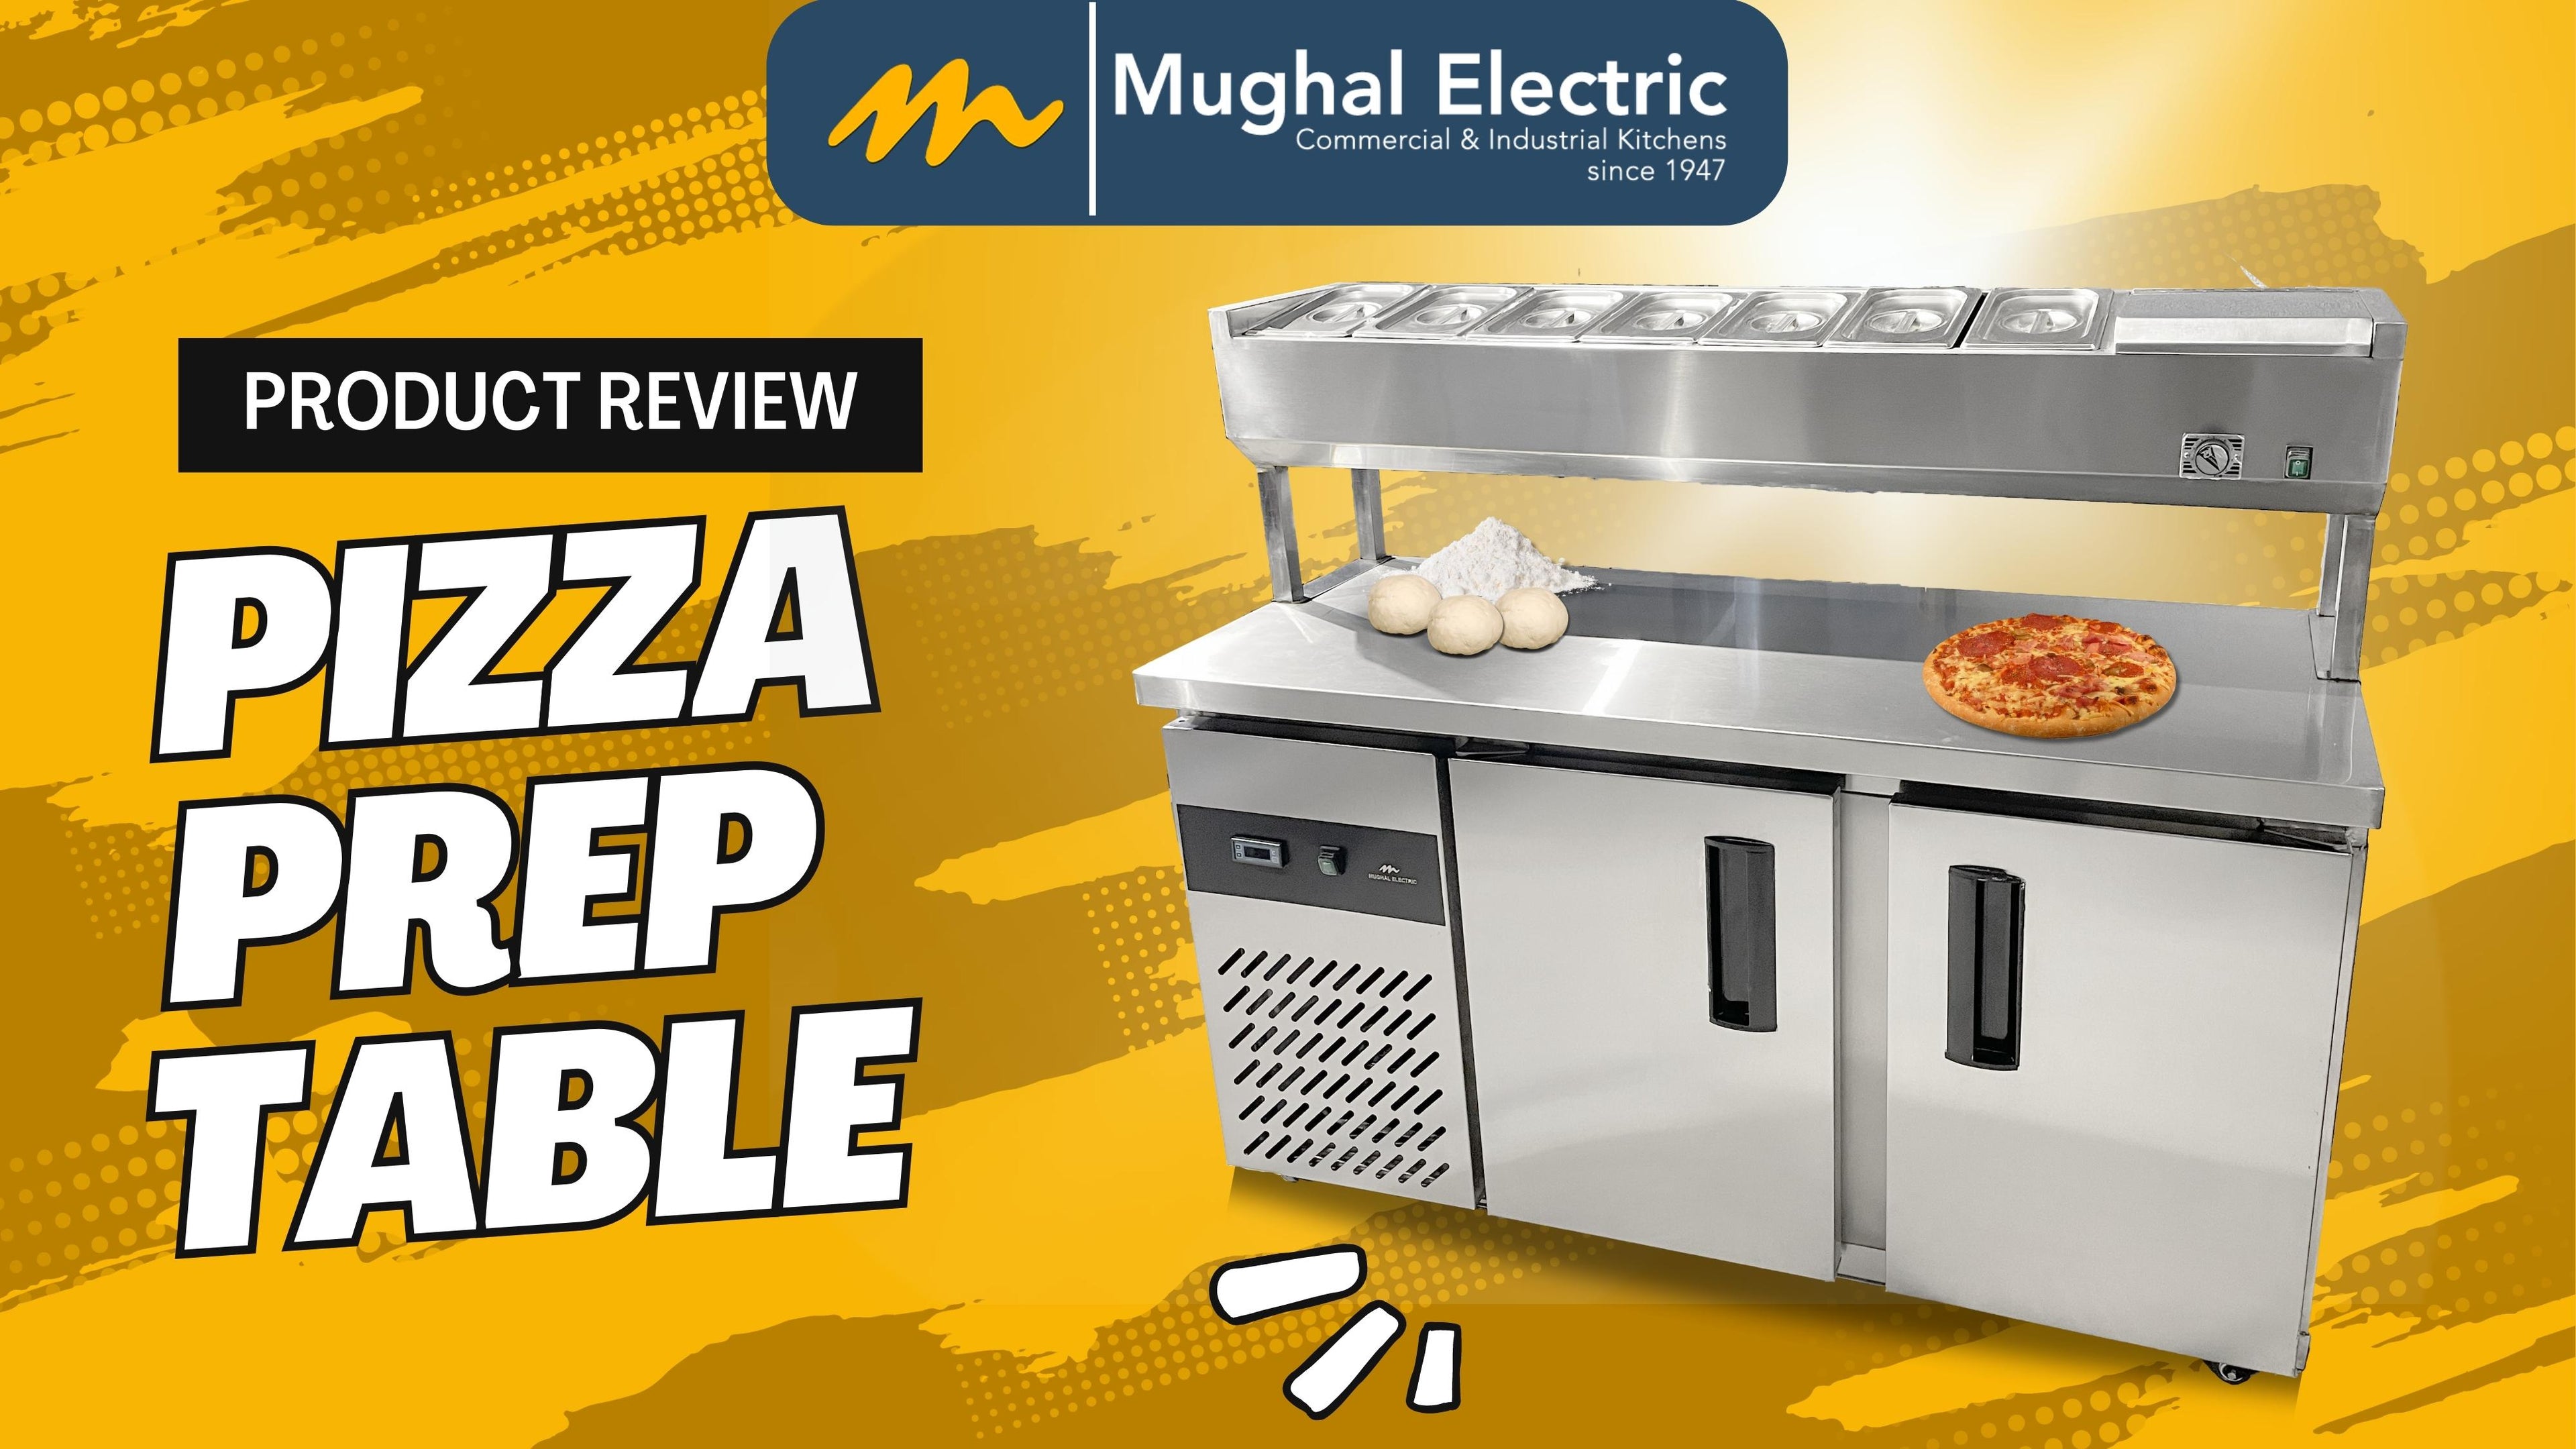 Load video: Refrigeration equipment | fast food equipment | pizza equipment | product review